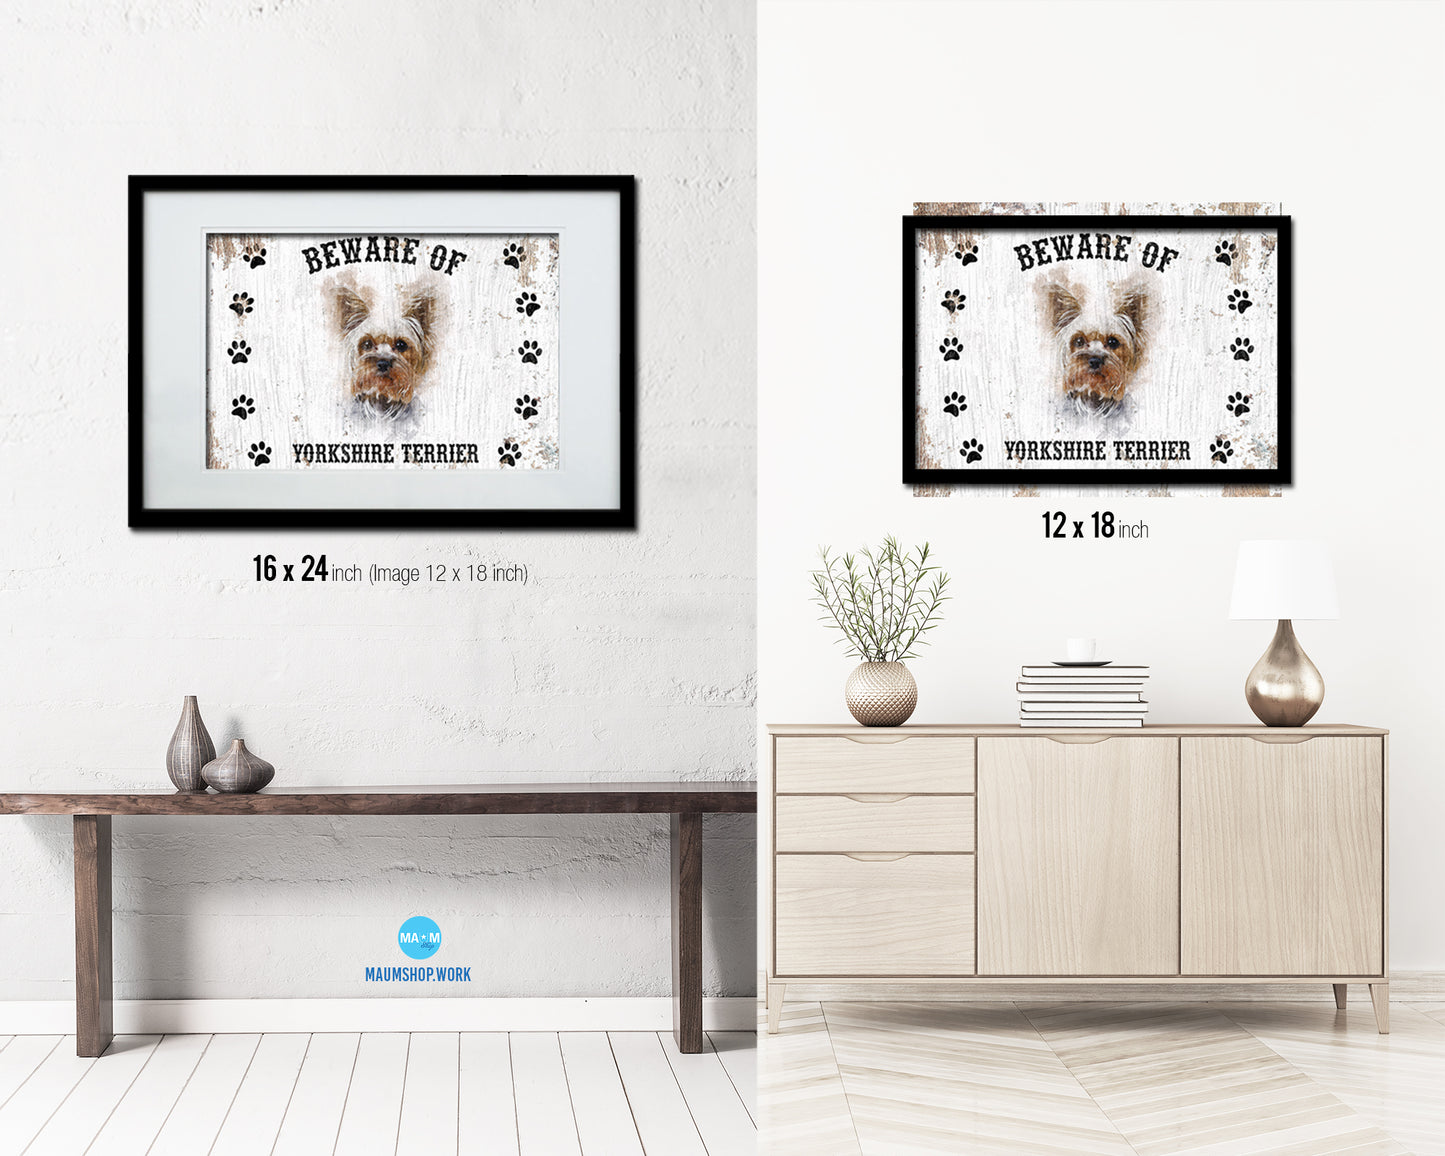 Beware of Russell Terrier Sign Wood Framed Print Wall Art Decor Gifts